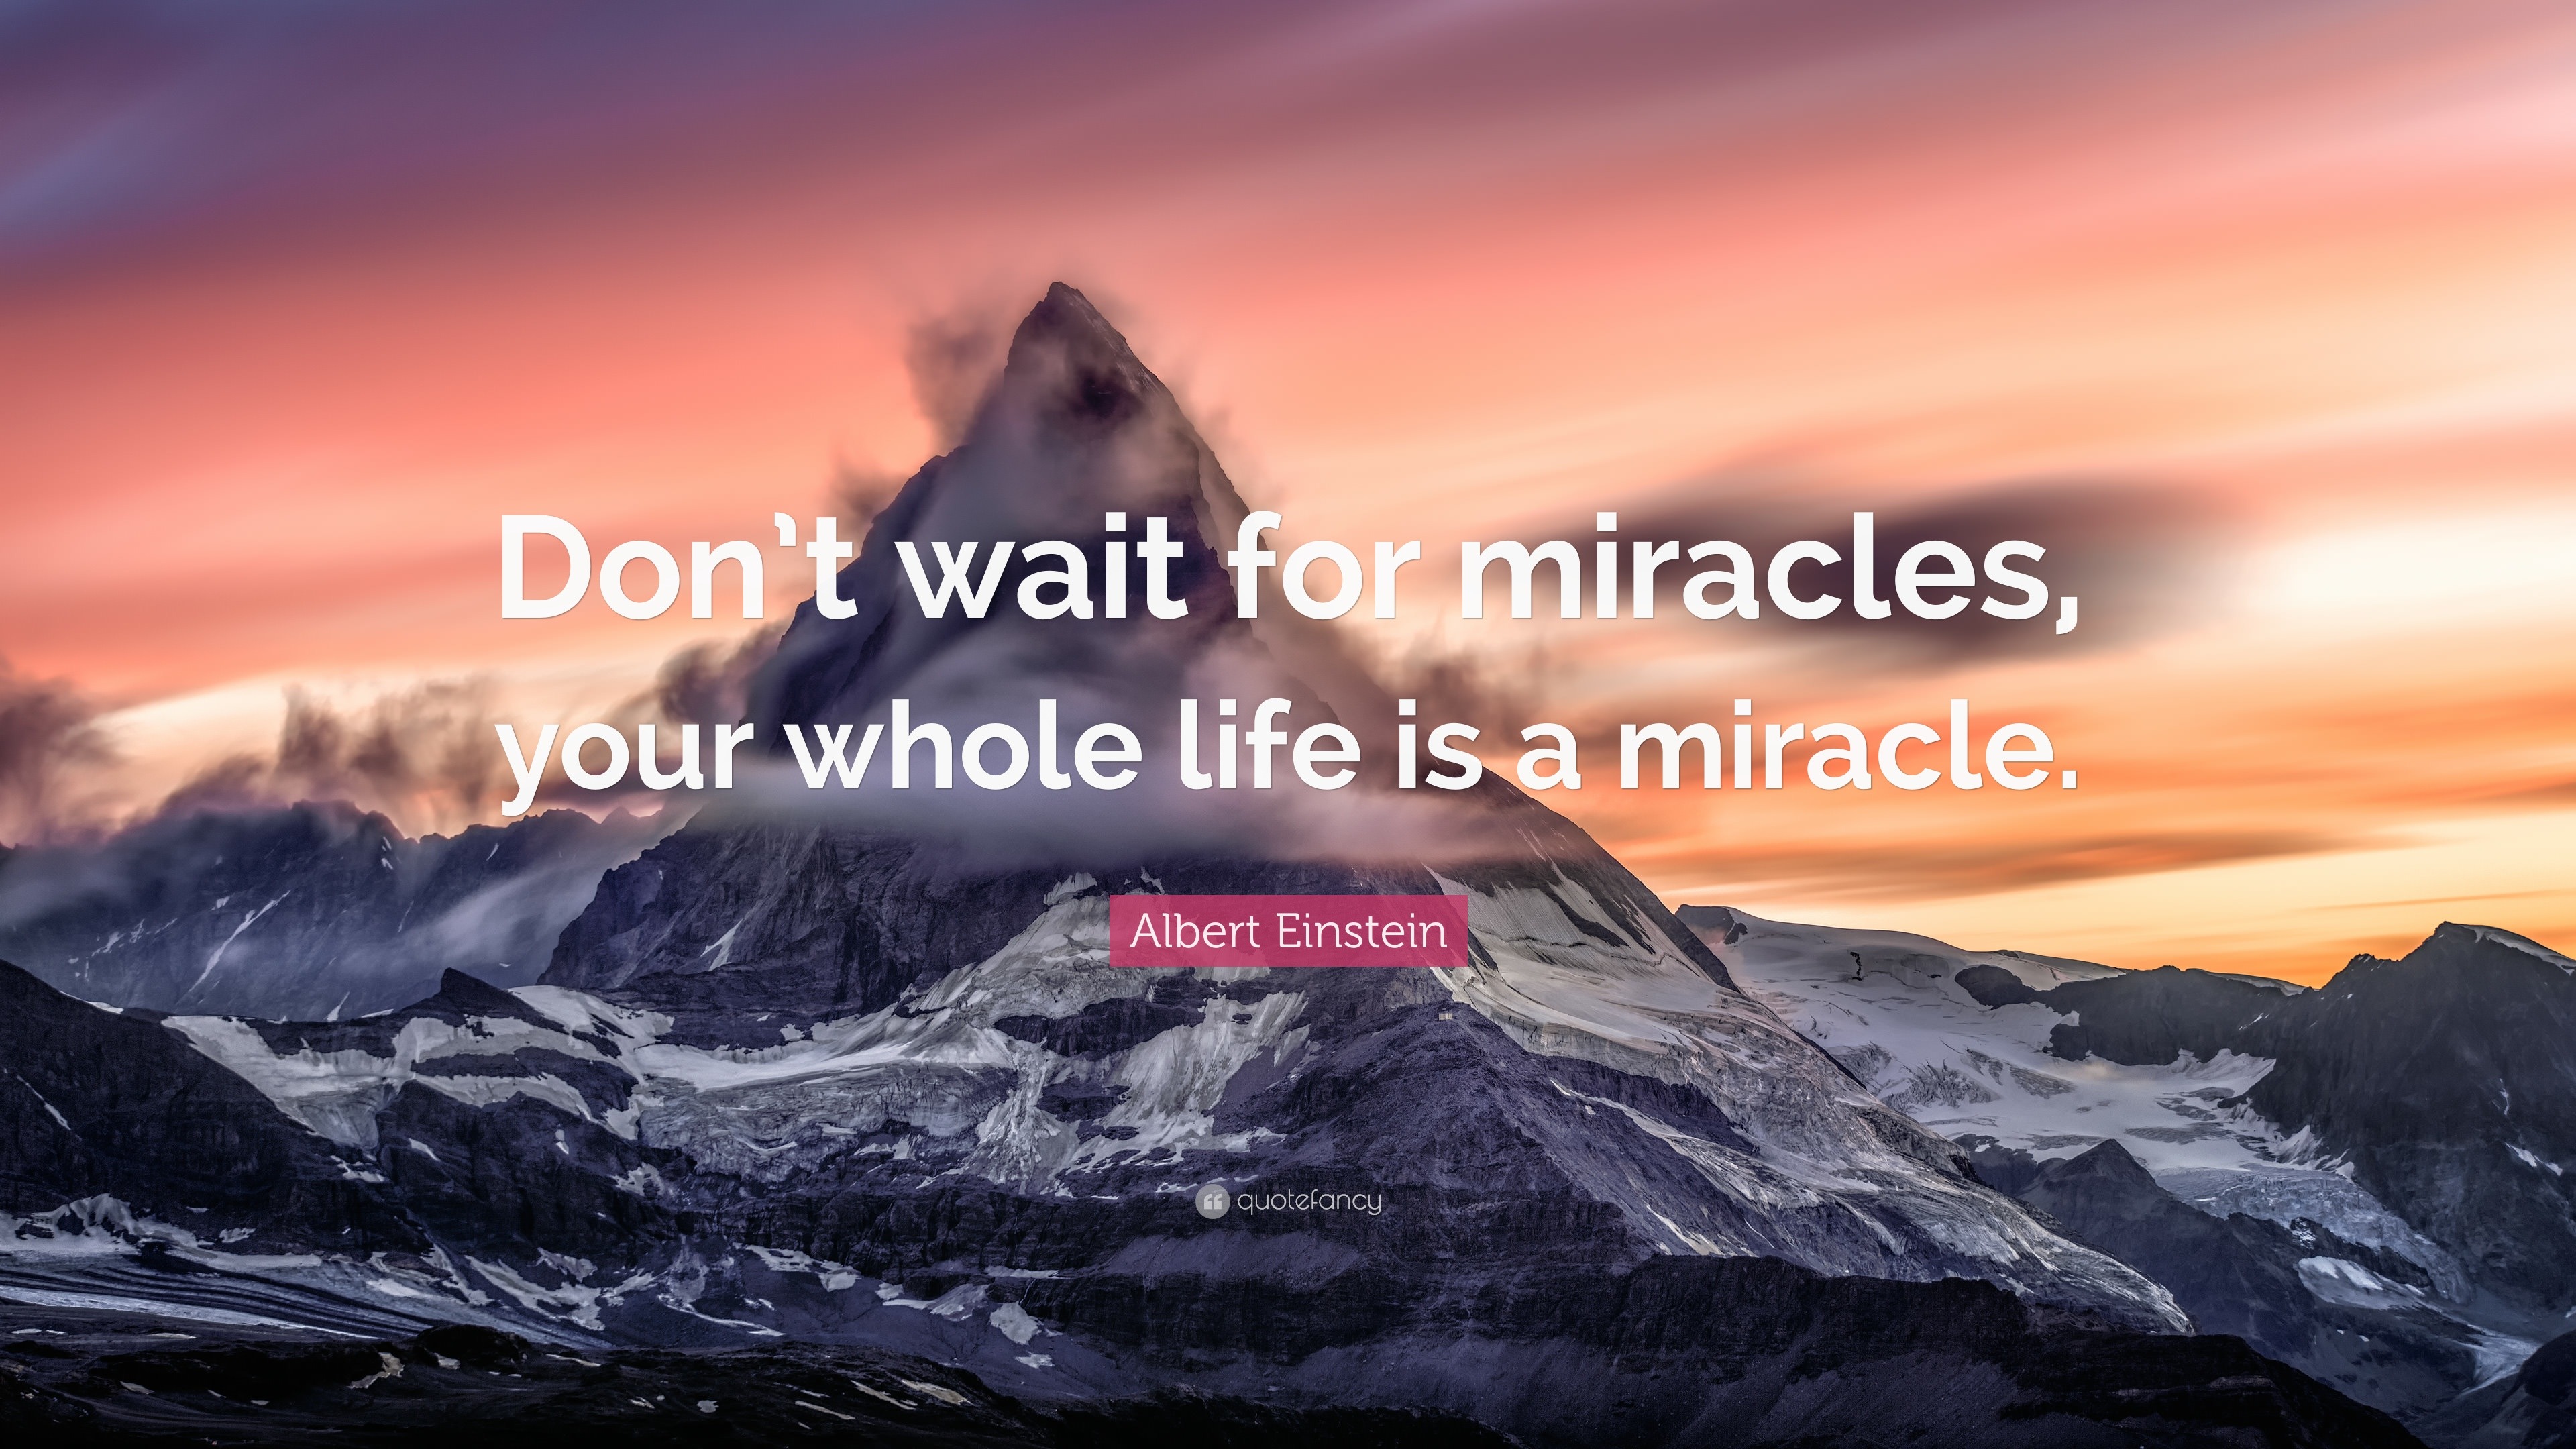 Albert Einstein Quote Don T Wait For Miracles Your Whole Life Is A Miracle 12 Wallpapers Quotefancy